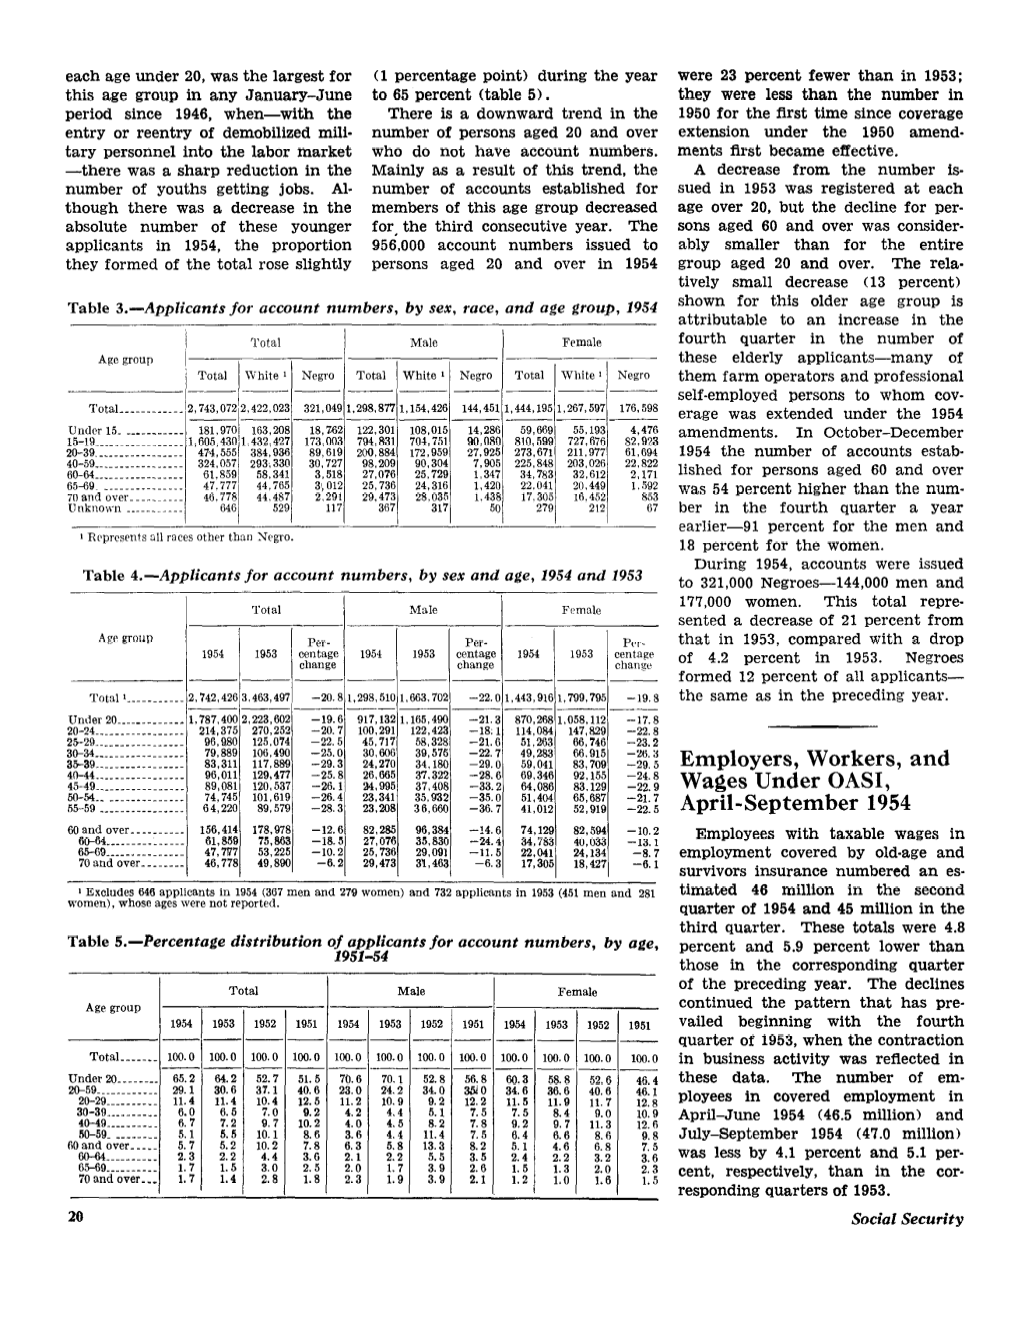 Employers, Workers, and Wages Under OASI, April–September 1954